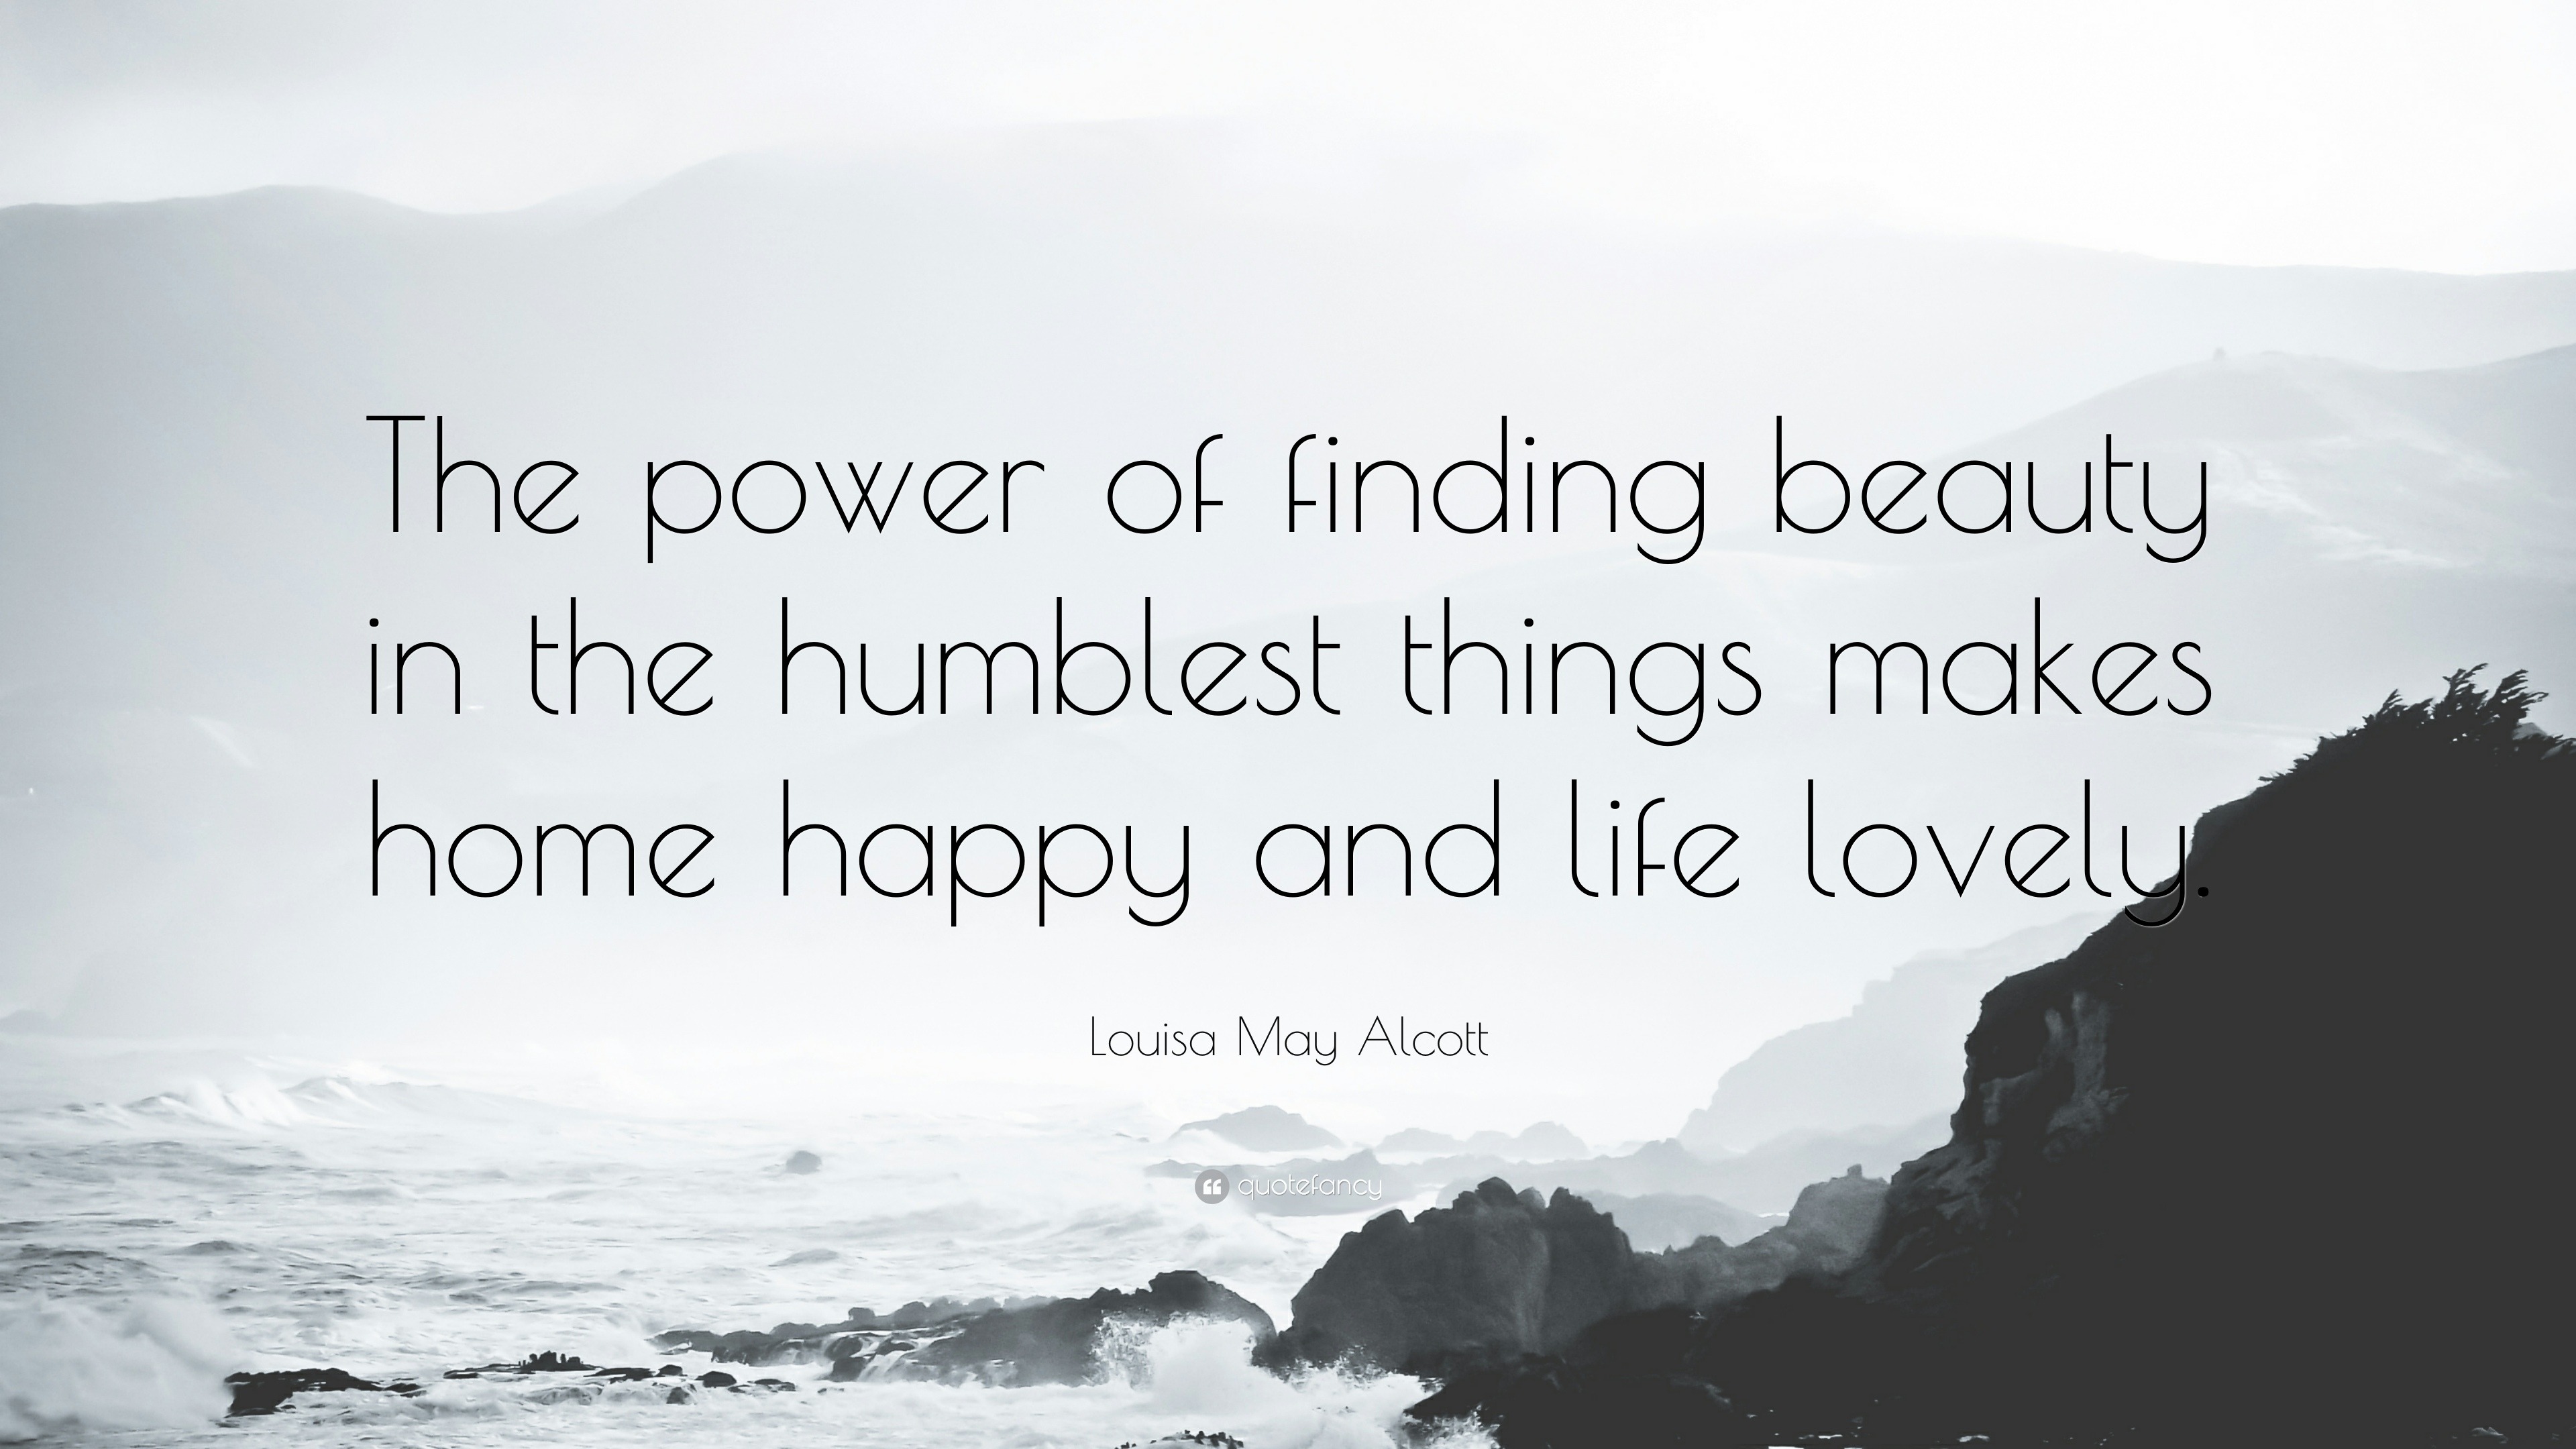 228191-Louisa-May-Alcott-Quote-The-power-of-finding-beauty-in-the.jpg